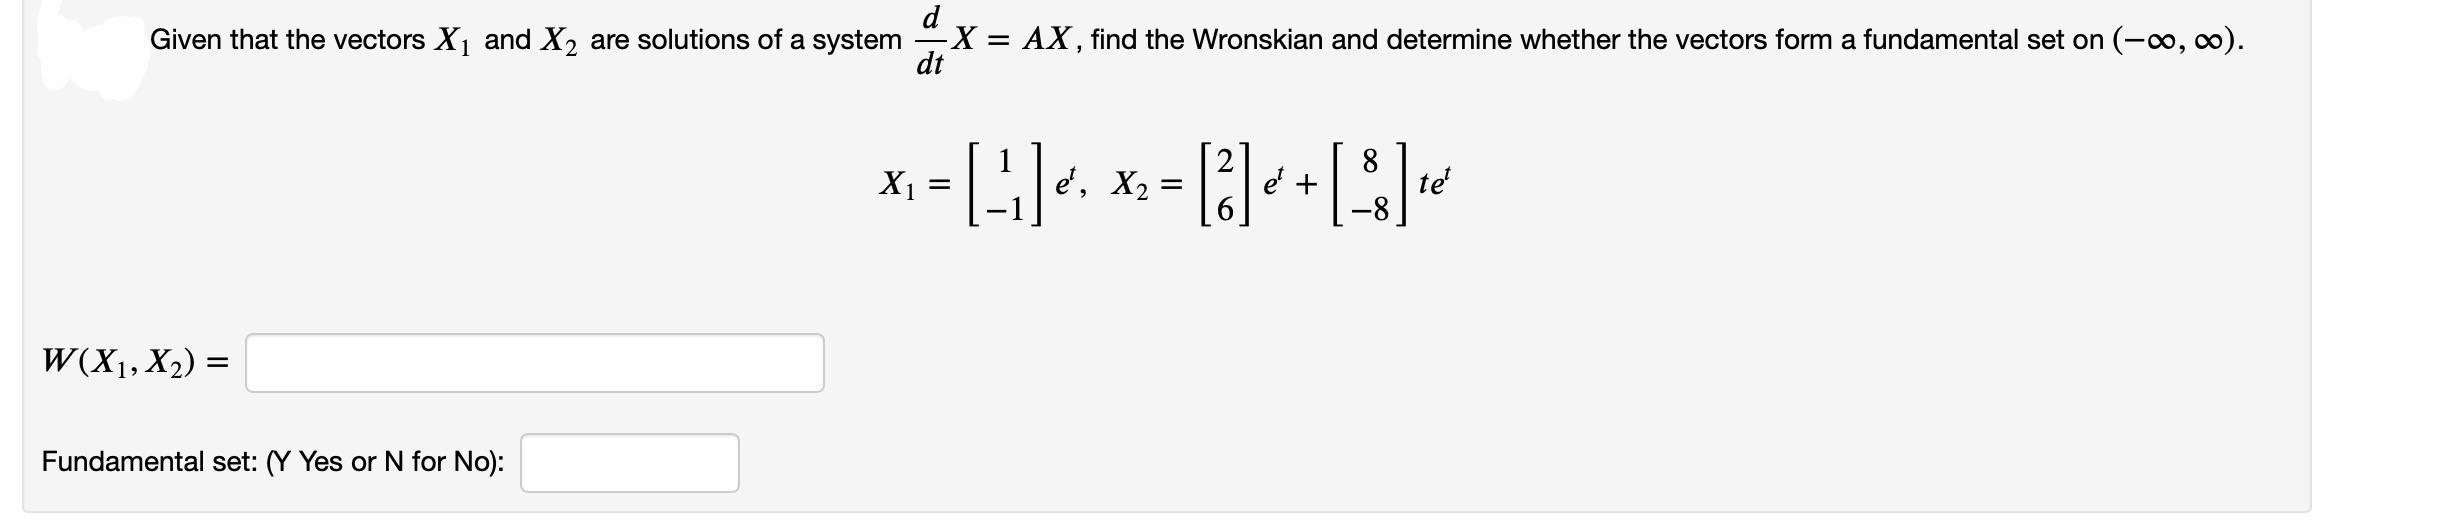 Given that the vectors X and X2 are solutions of a system -X = AX, find the Wronskian and determine whether the vectors form a fundamental set on (-o, co).
%3D
dt
X1 =
e', X2
e' +
te
W(X1, X2) =
Fundamental set: (Y Yes or N for No):
